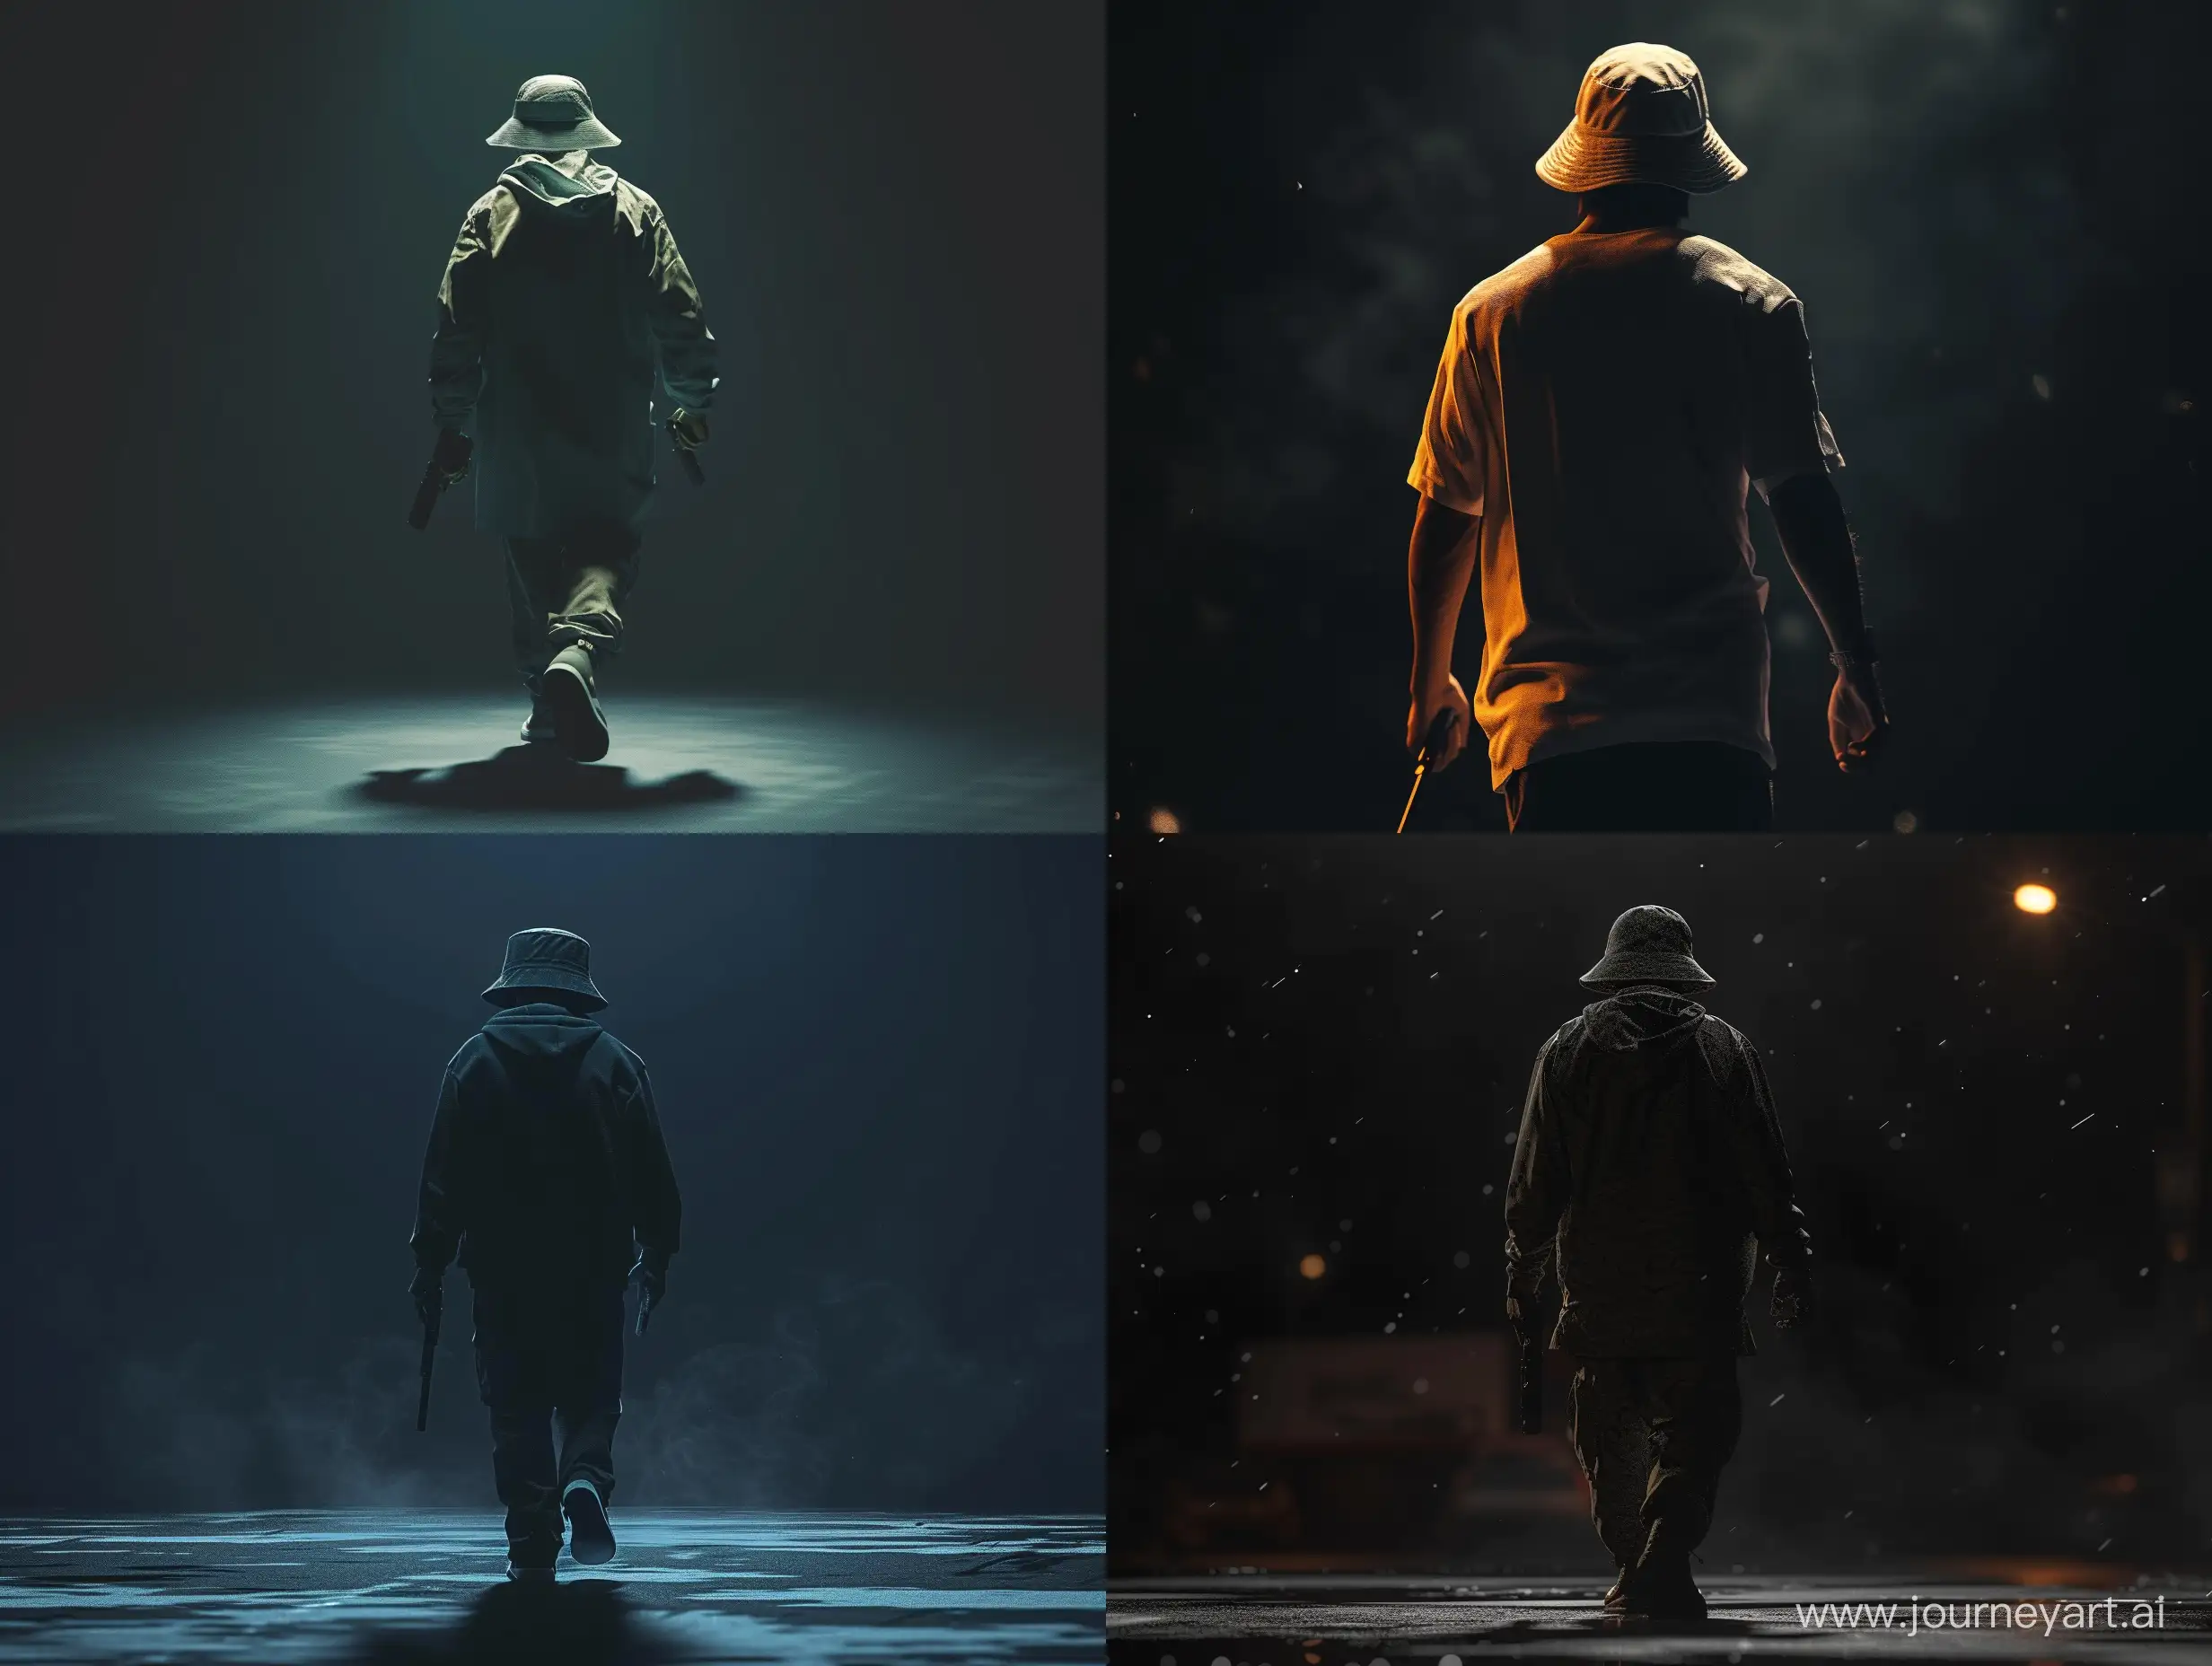 hitman with bucket hat, walking towards us, dark environment, we can only see the back from a distance. grand theft auto artstyle, loading screen, celshading, highly detailed, studio lighting